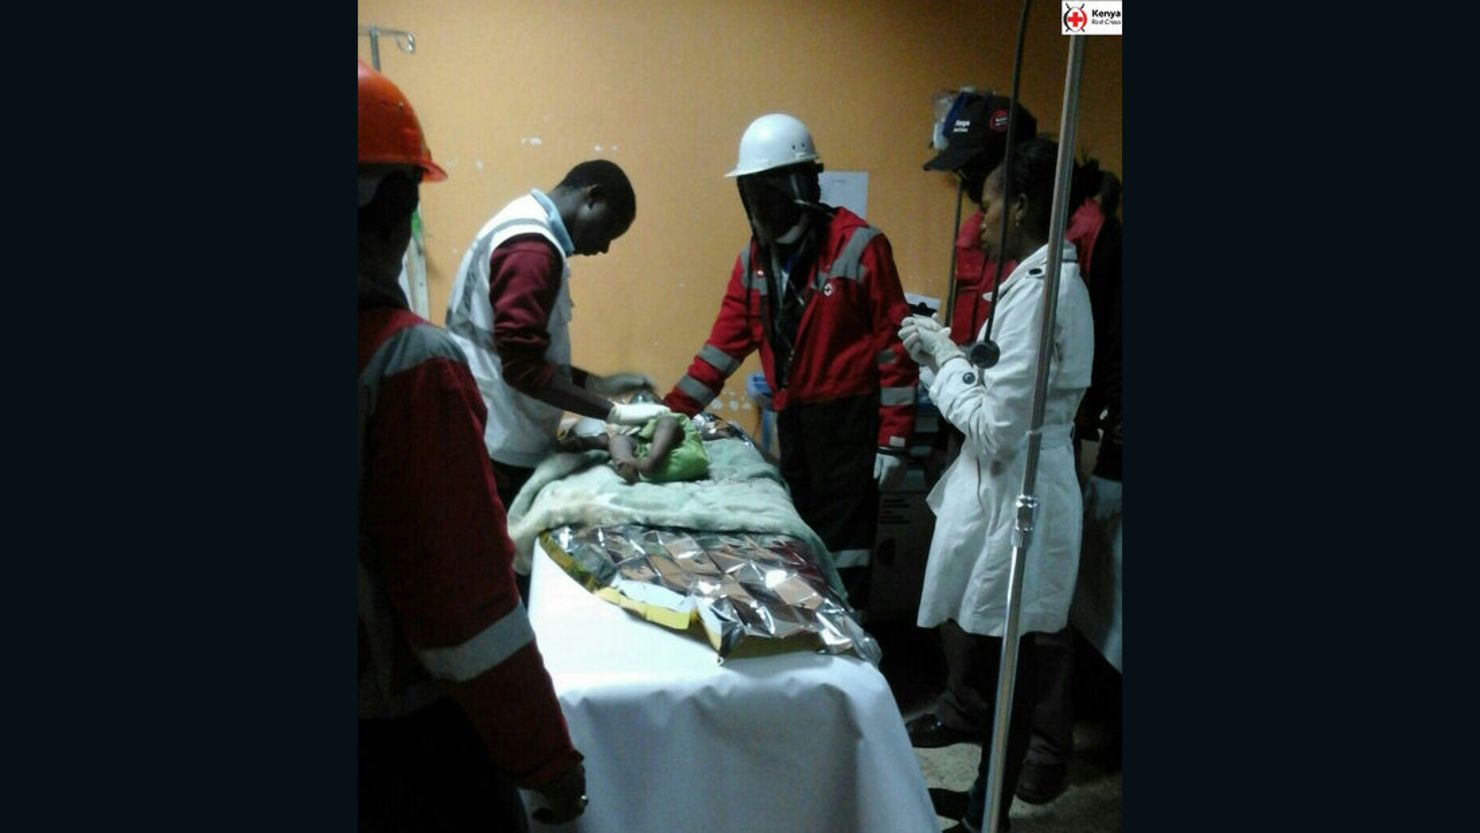 A baby girl receives treatment after being rescued from the rubble of a building in Nairobi.